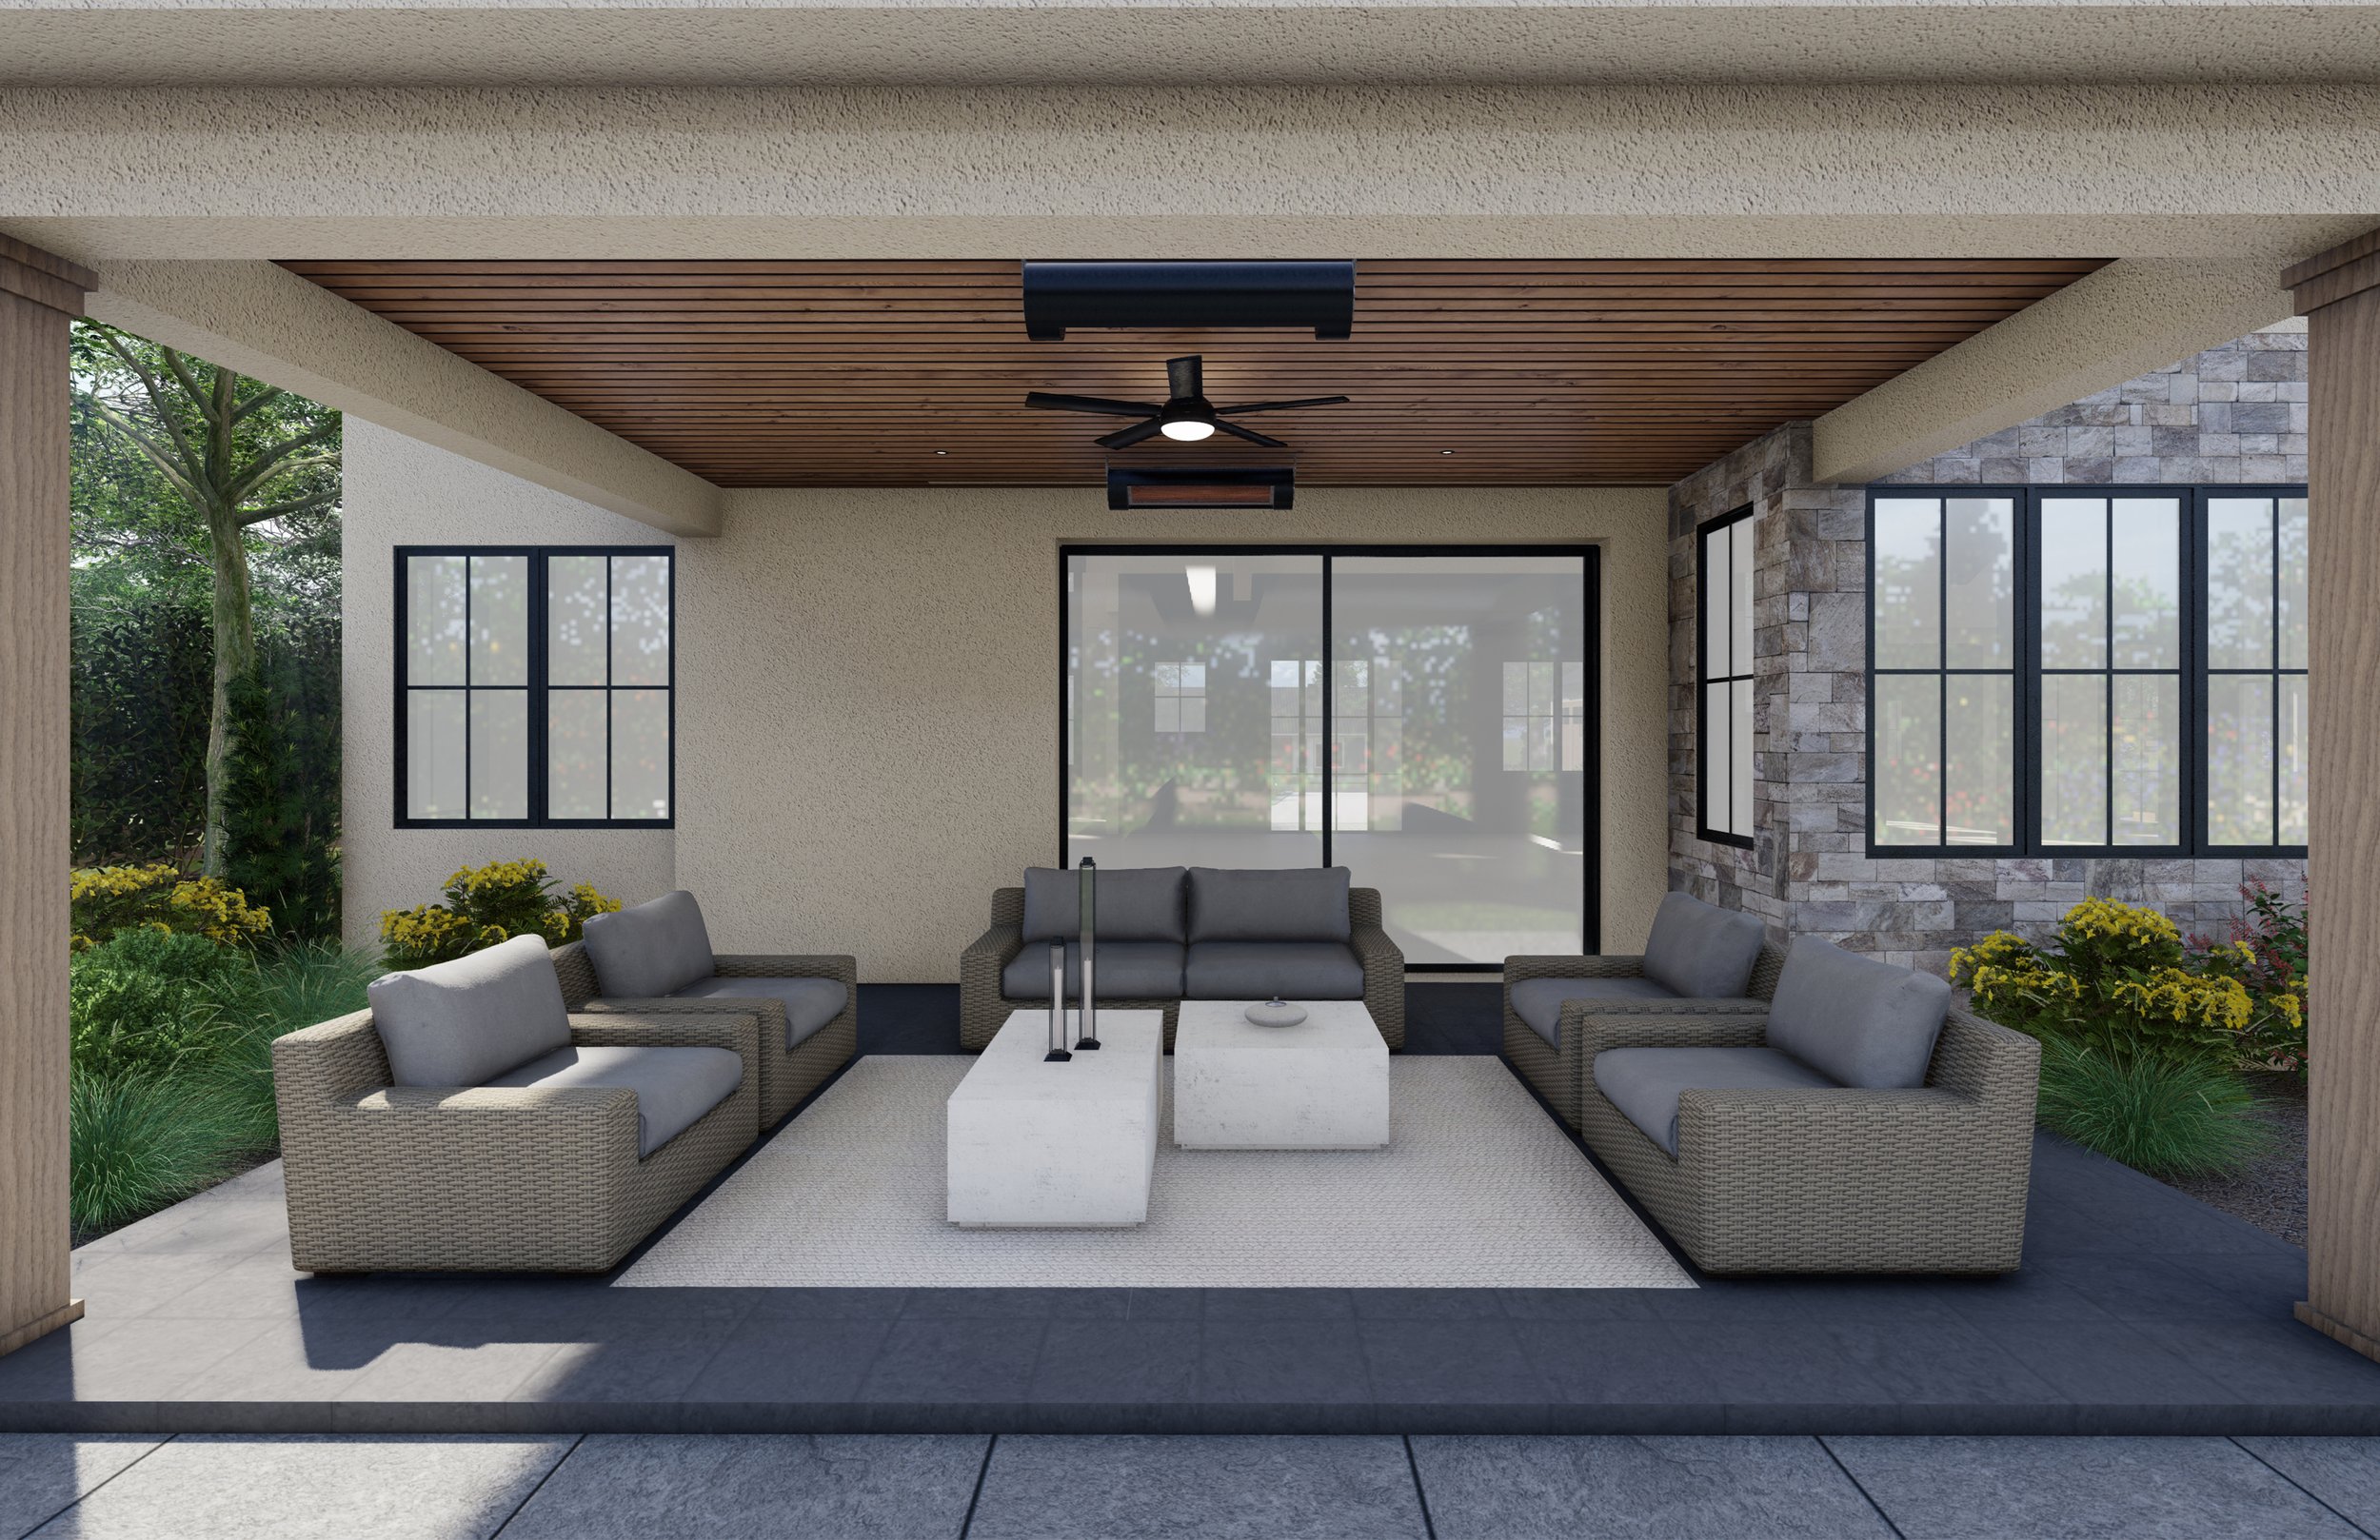 Abaco sofa and four lounge chairs on spacious back patio.